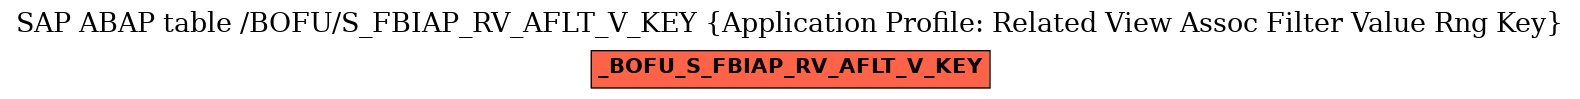 E-R Diagram for table /BOFU/S_FBIAP_RV_AFLT_V_KEY (Application Profile: Related View Assoc Filter Value Rng Key)